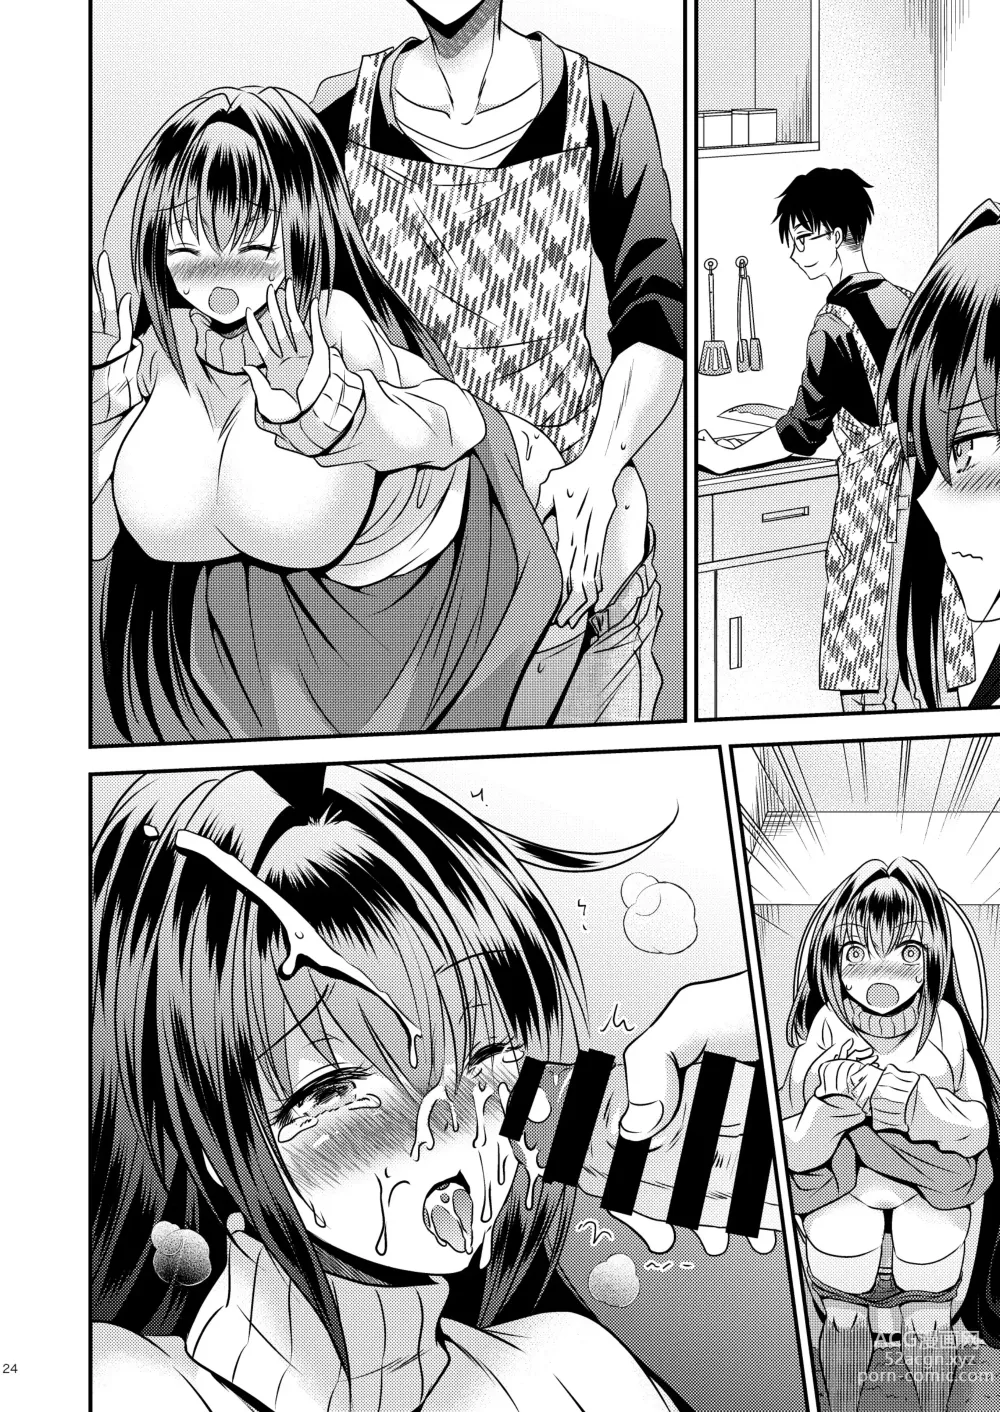 Page 24 of doujinshi 性欲処理に使っていた妹と入れ替わった兄